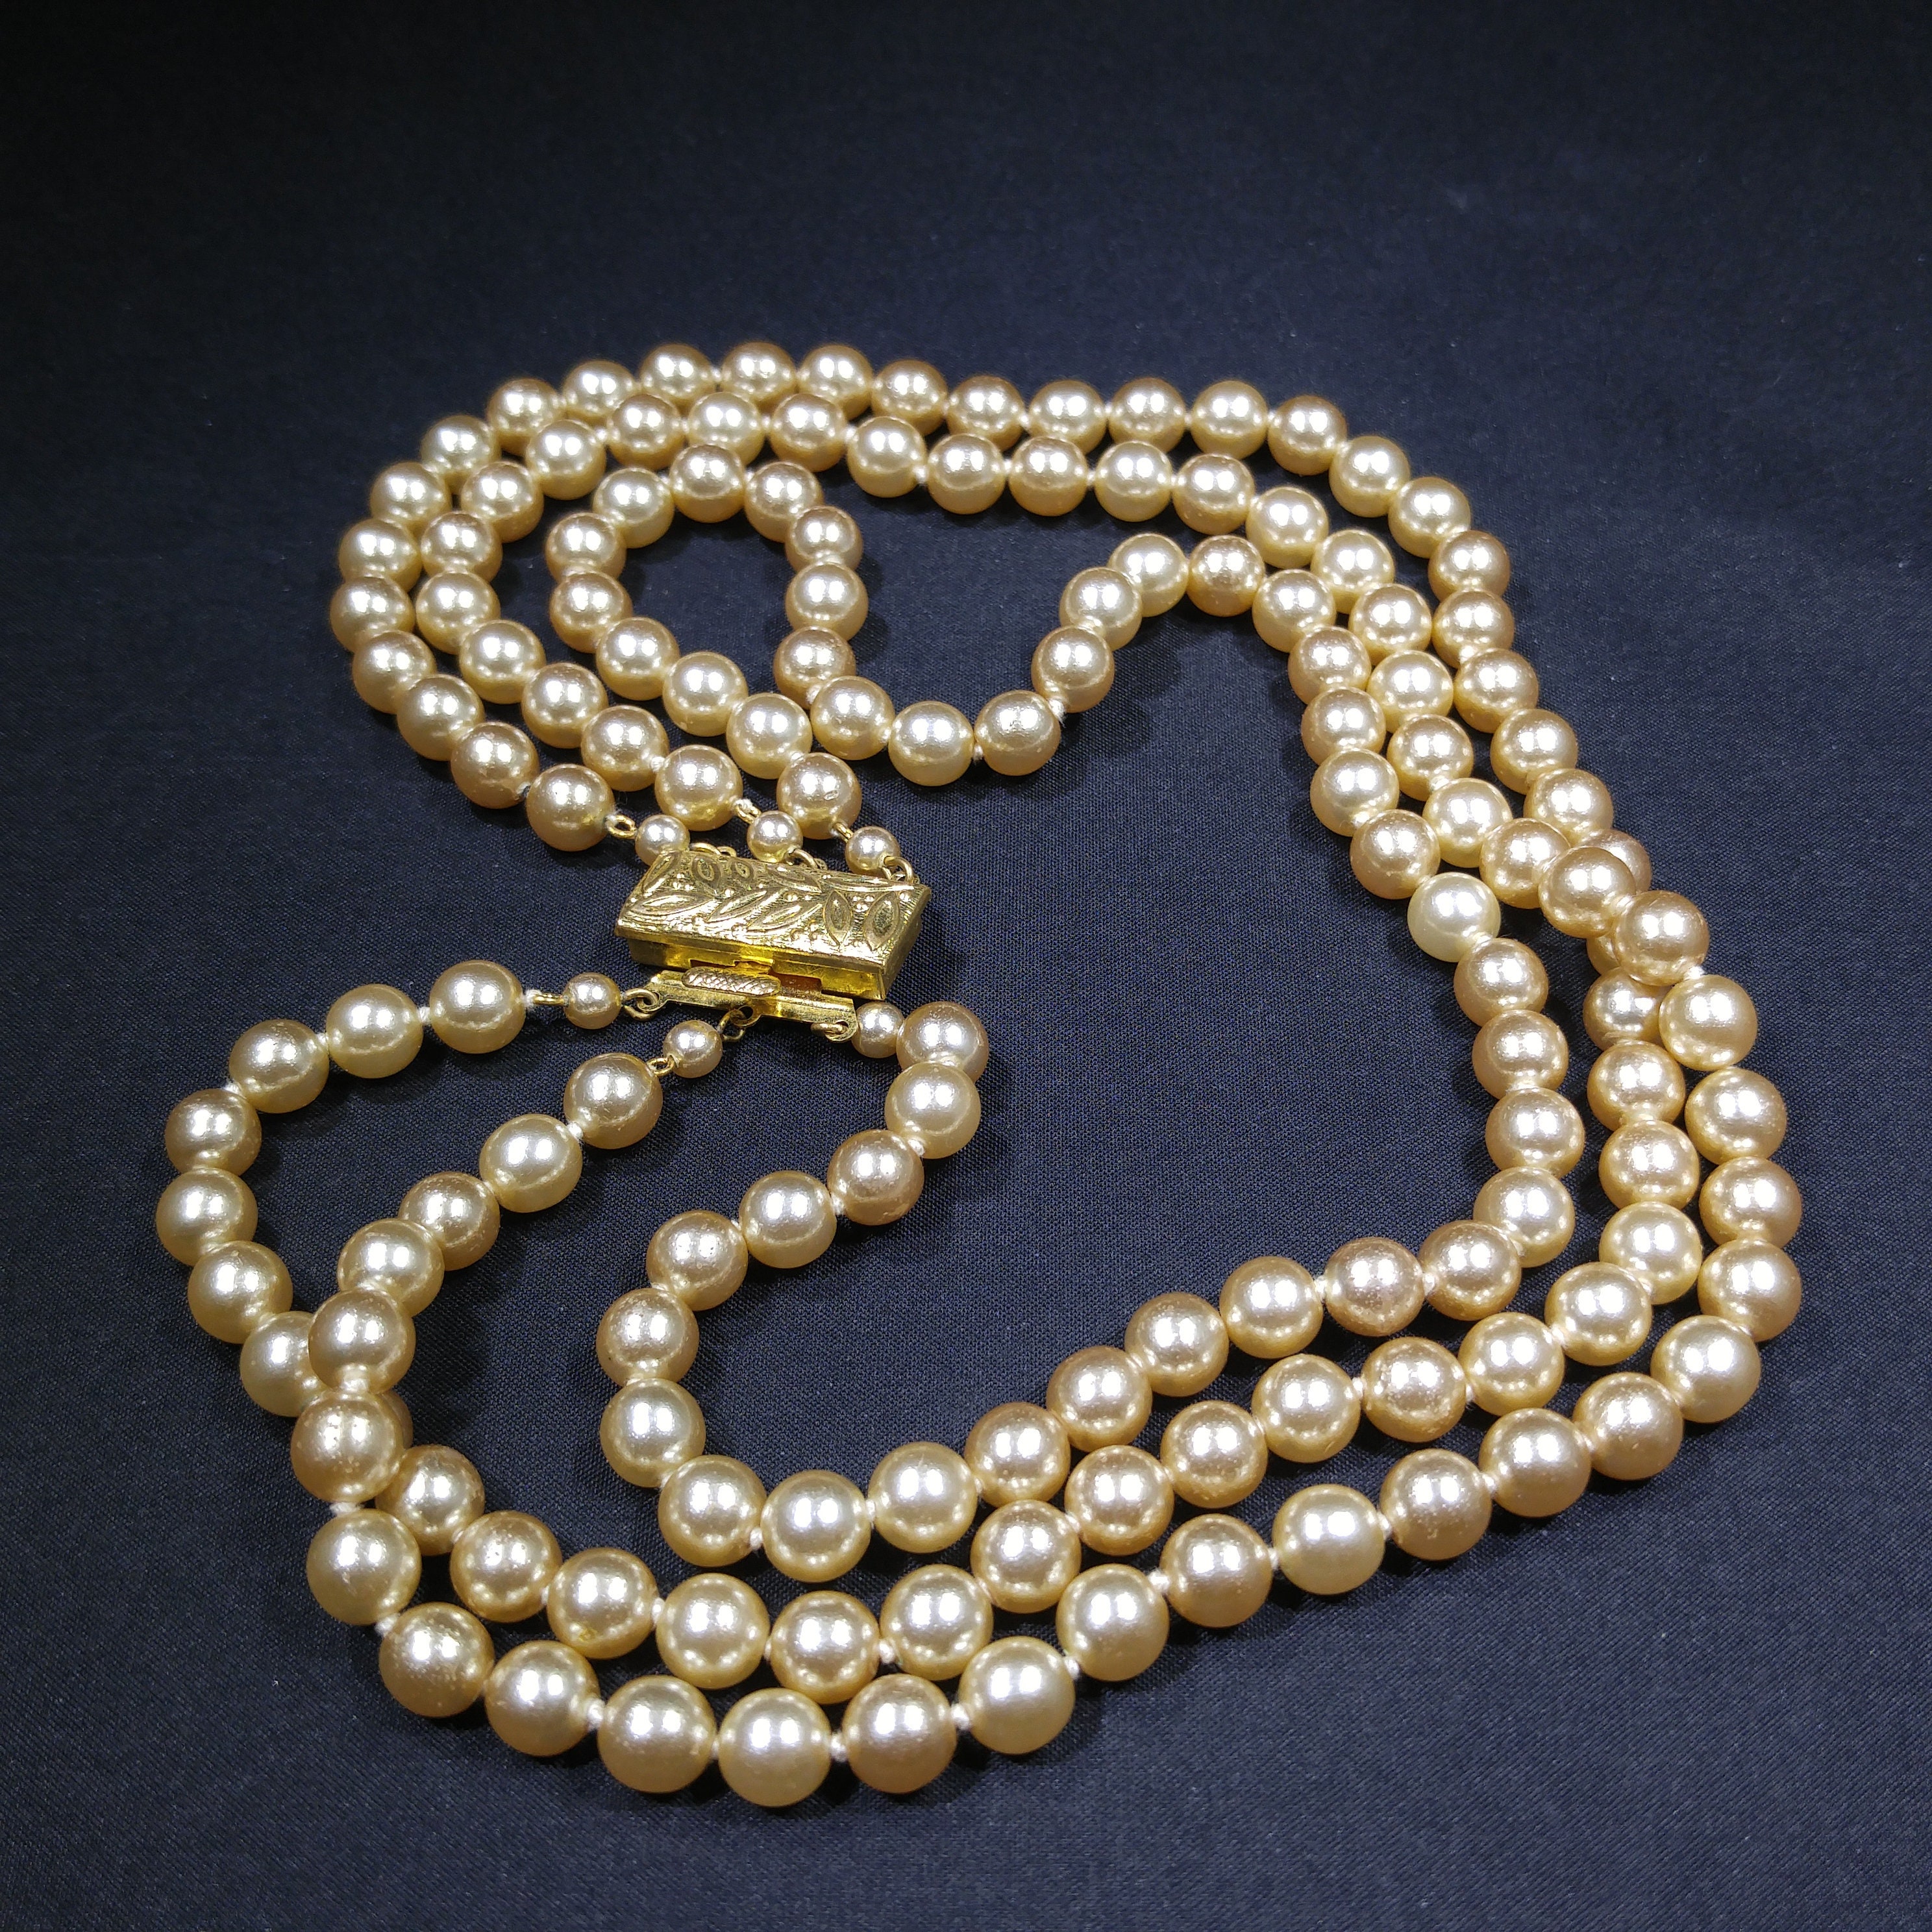 Champagne GOLD PEARLS, No Hole Fake Pearls, Multisize Faux Nonpareil  Acrylic Dragees, Opaque Caviar Bead Pearls, K12 